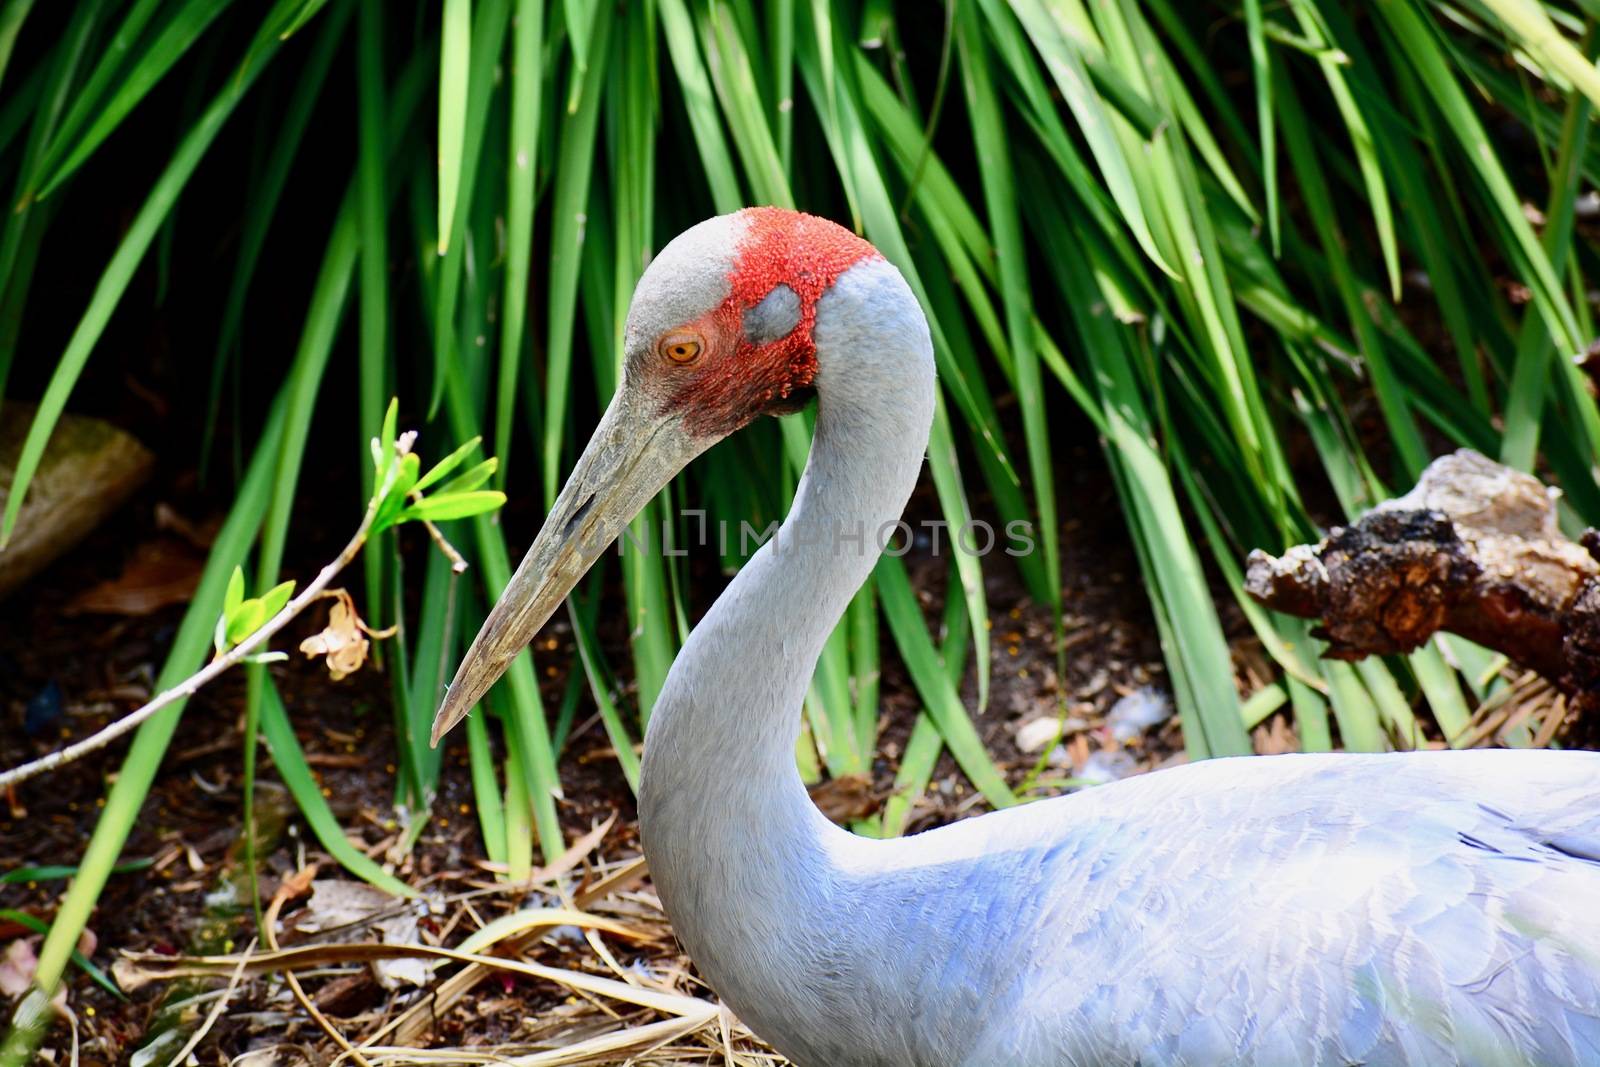 The brolga is a common, gregarious wetland bird species of tropical and south-eastern Australia and New Guinea.